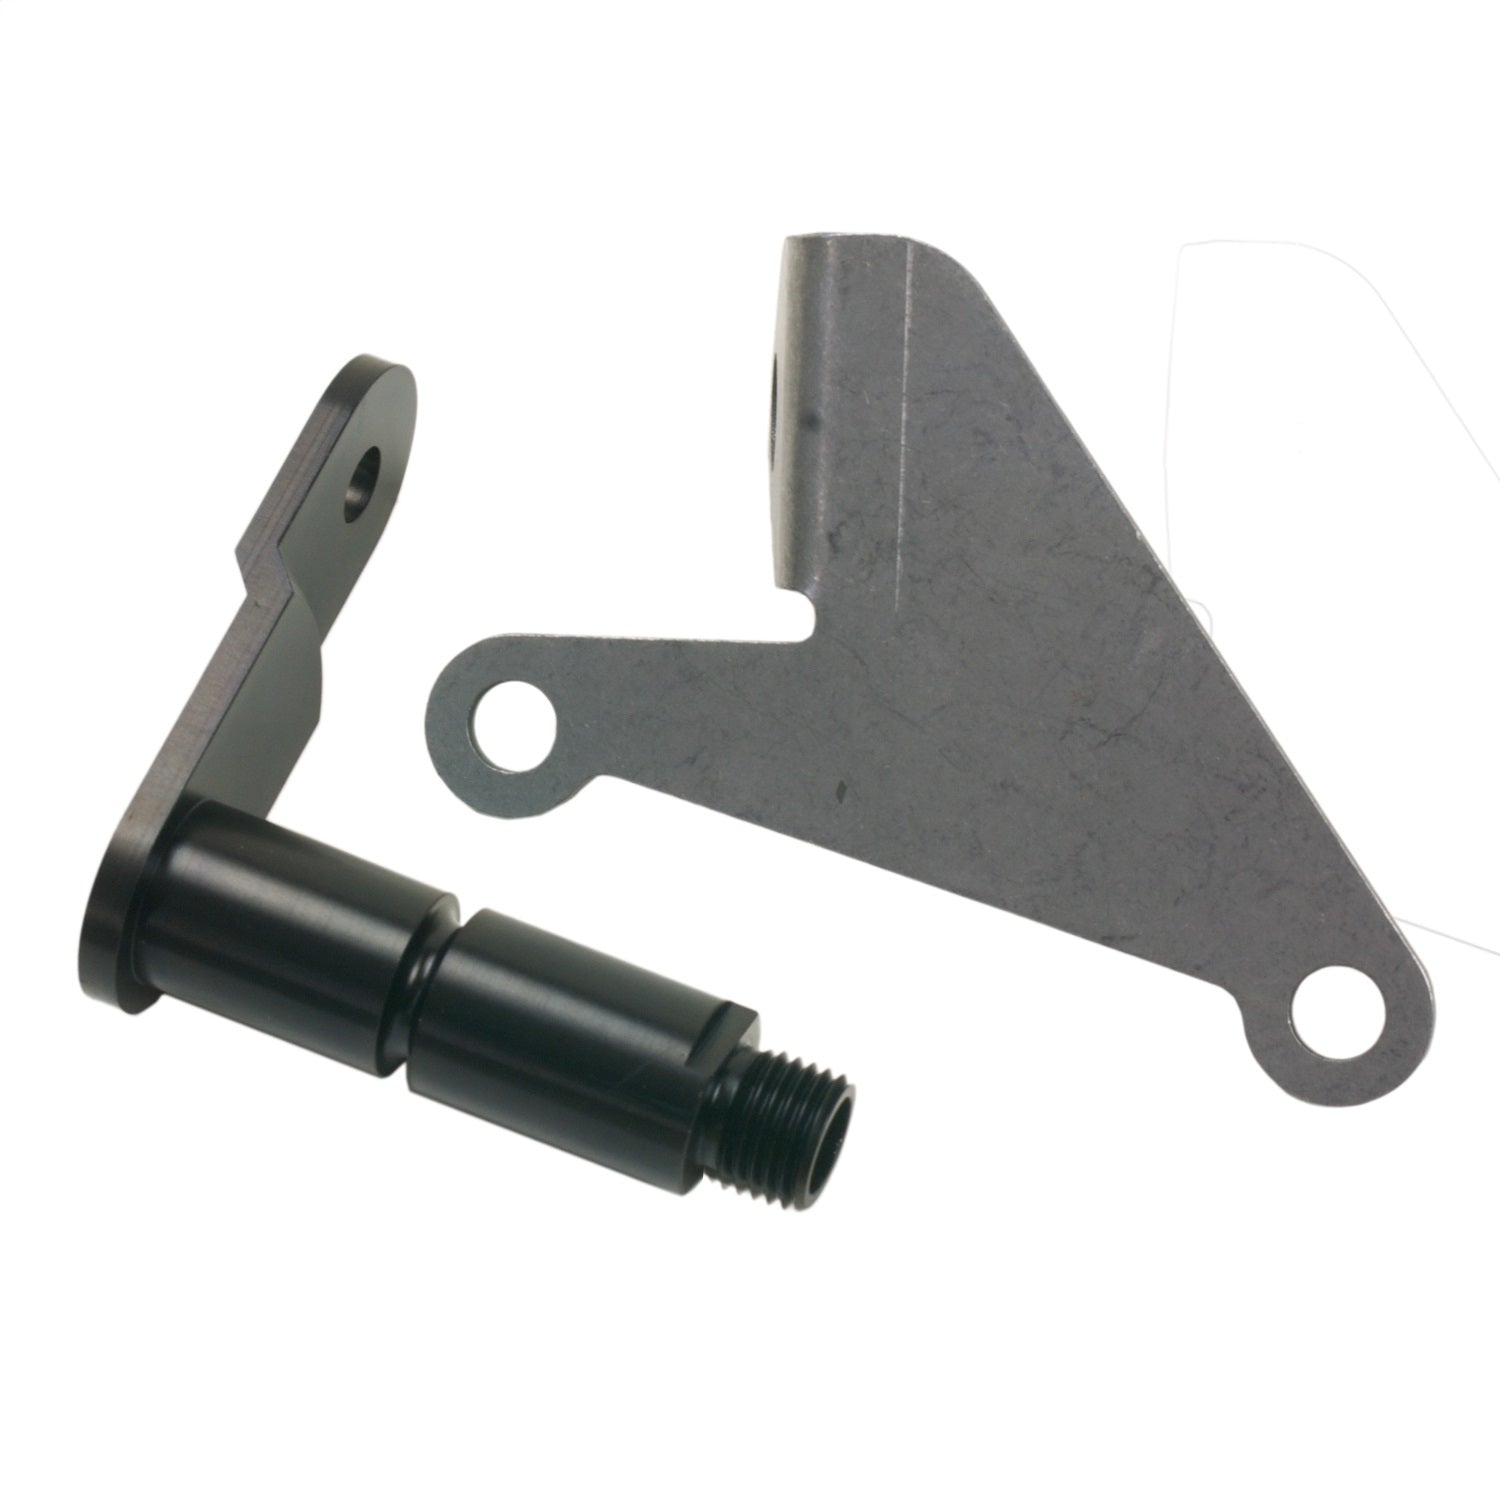 B&M 40496 Bracket and Lever Kit For Ford AOD